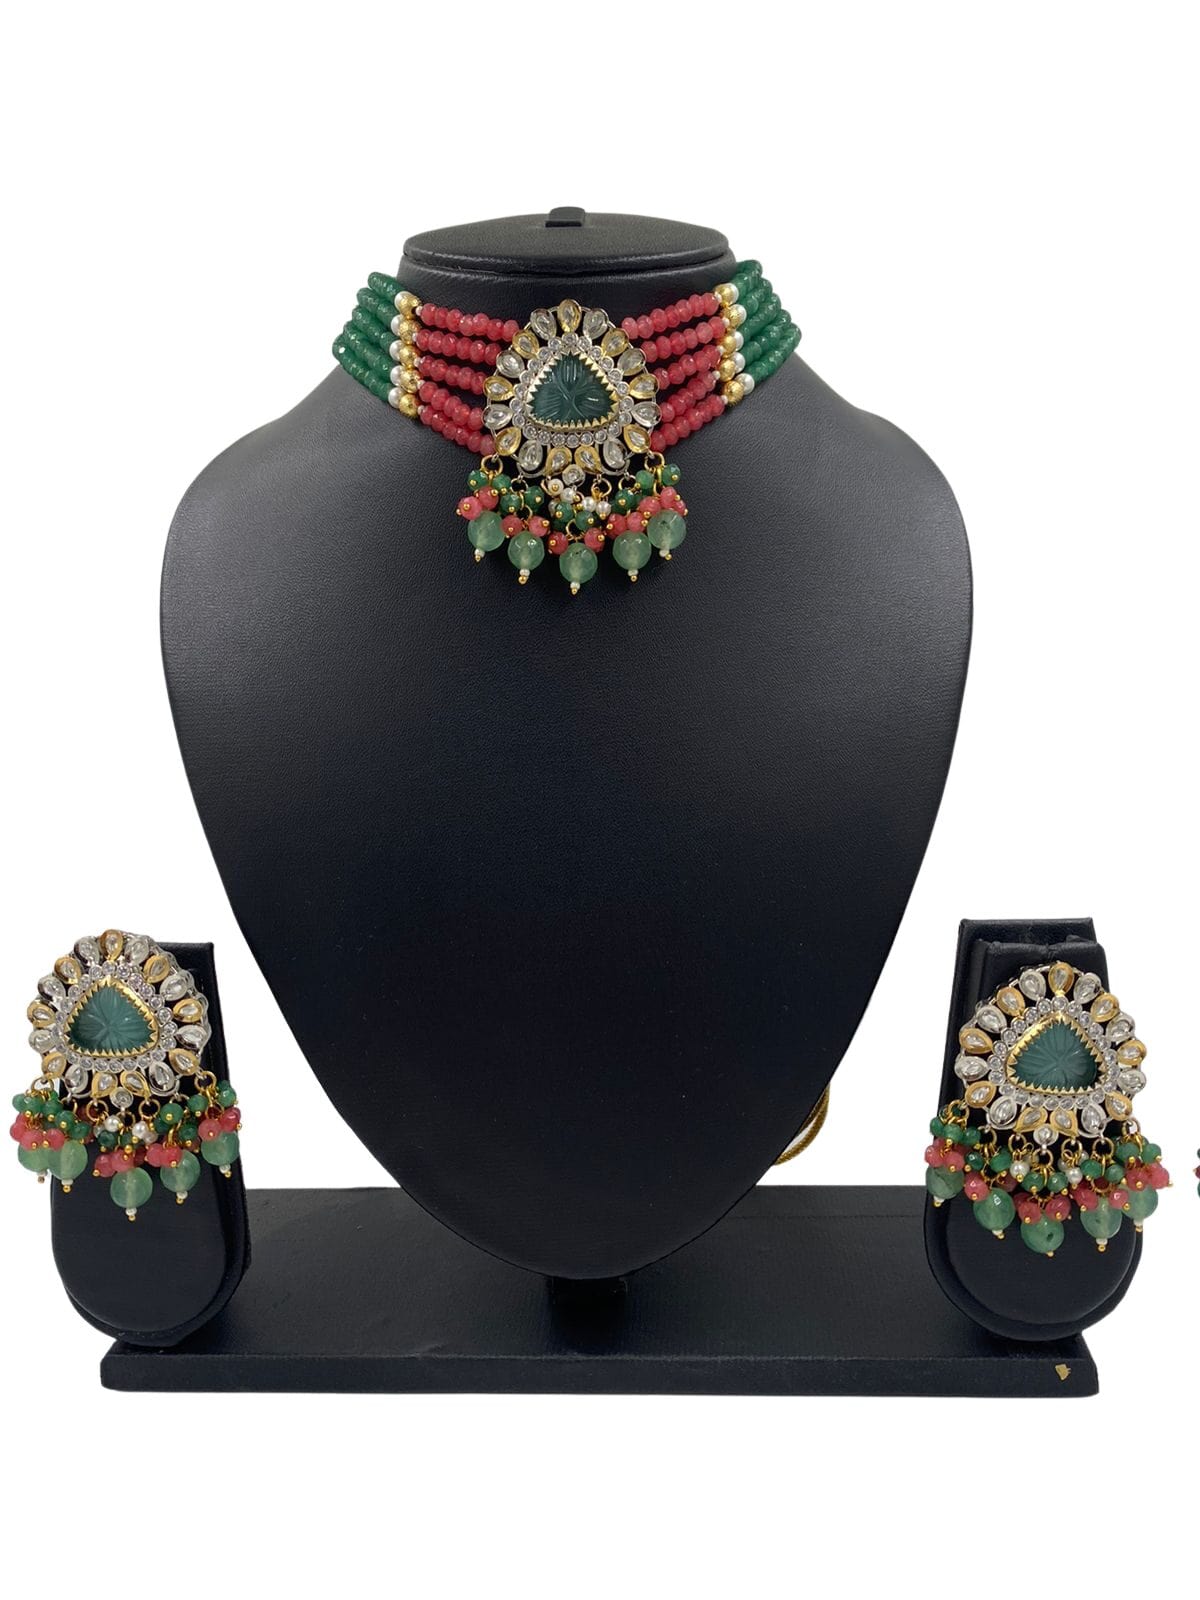 Modern Victorian Kundan And Beads Victorian polish Choker Necklace Set By Gehna Shop Victorian Necklace Sets